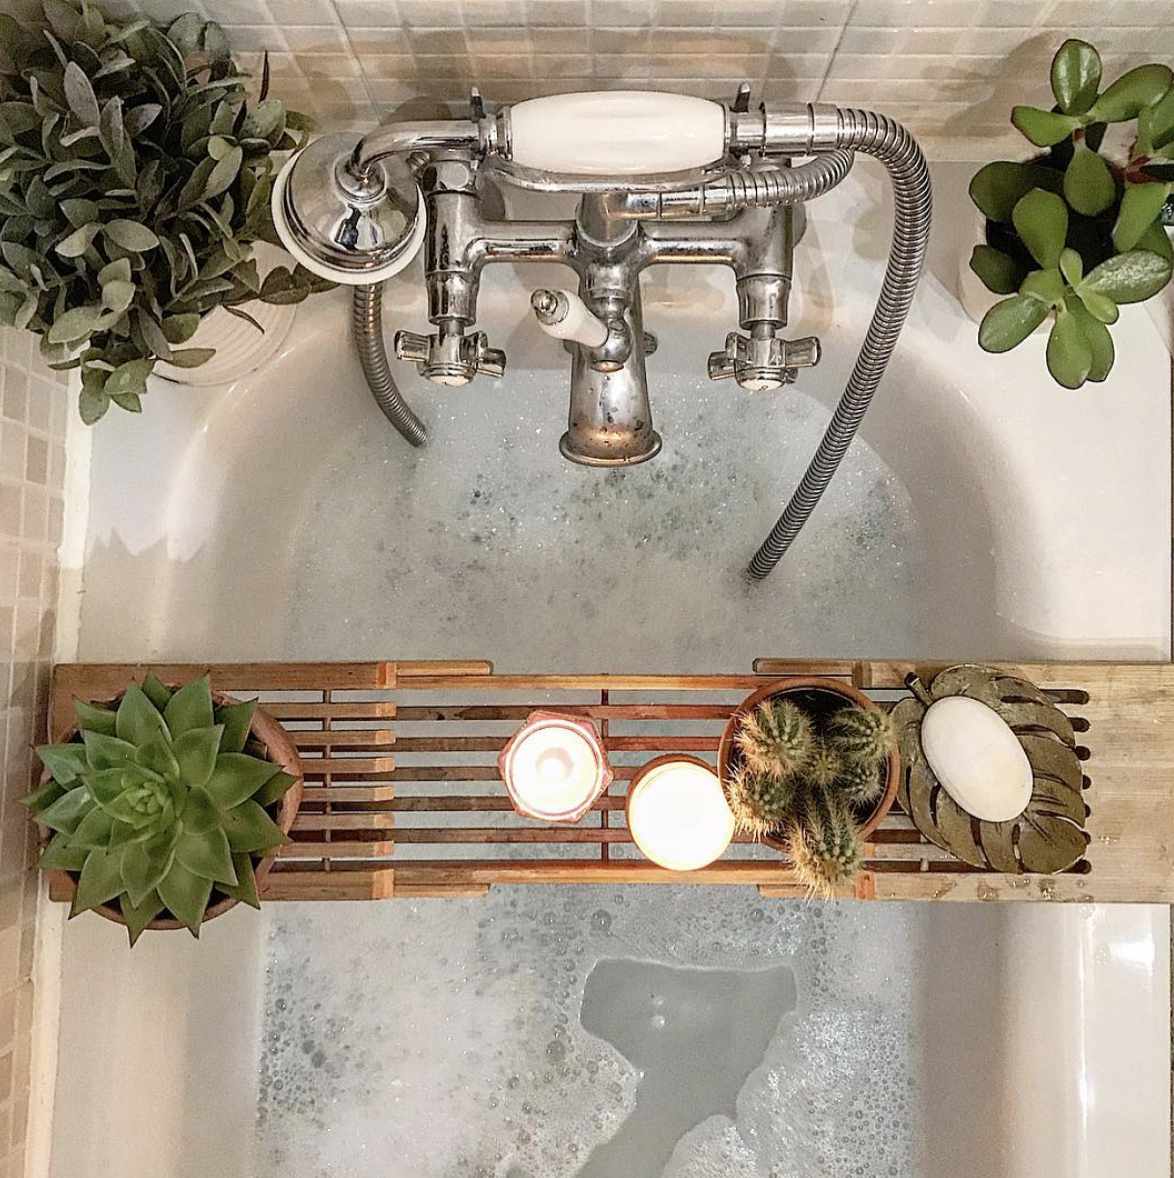 tub with plants